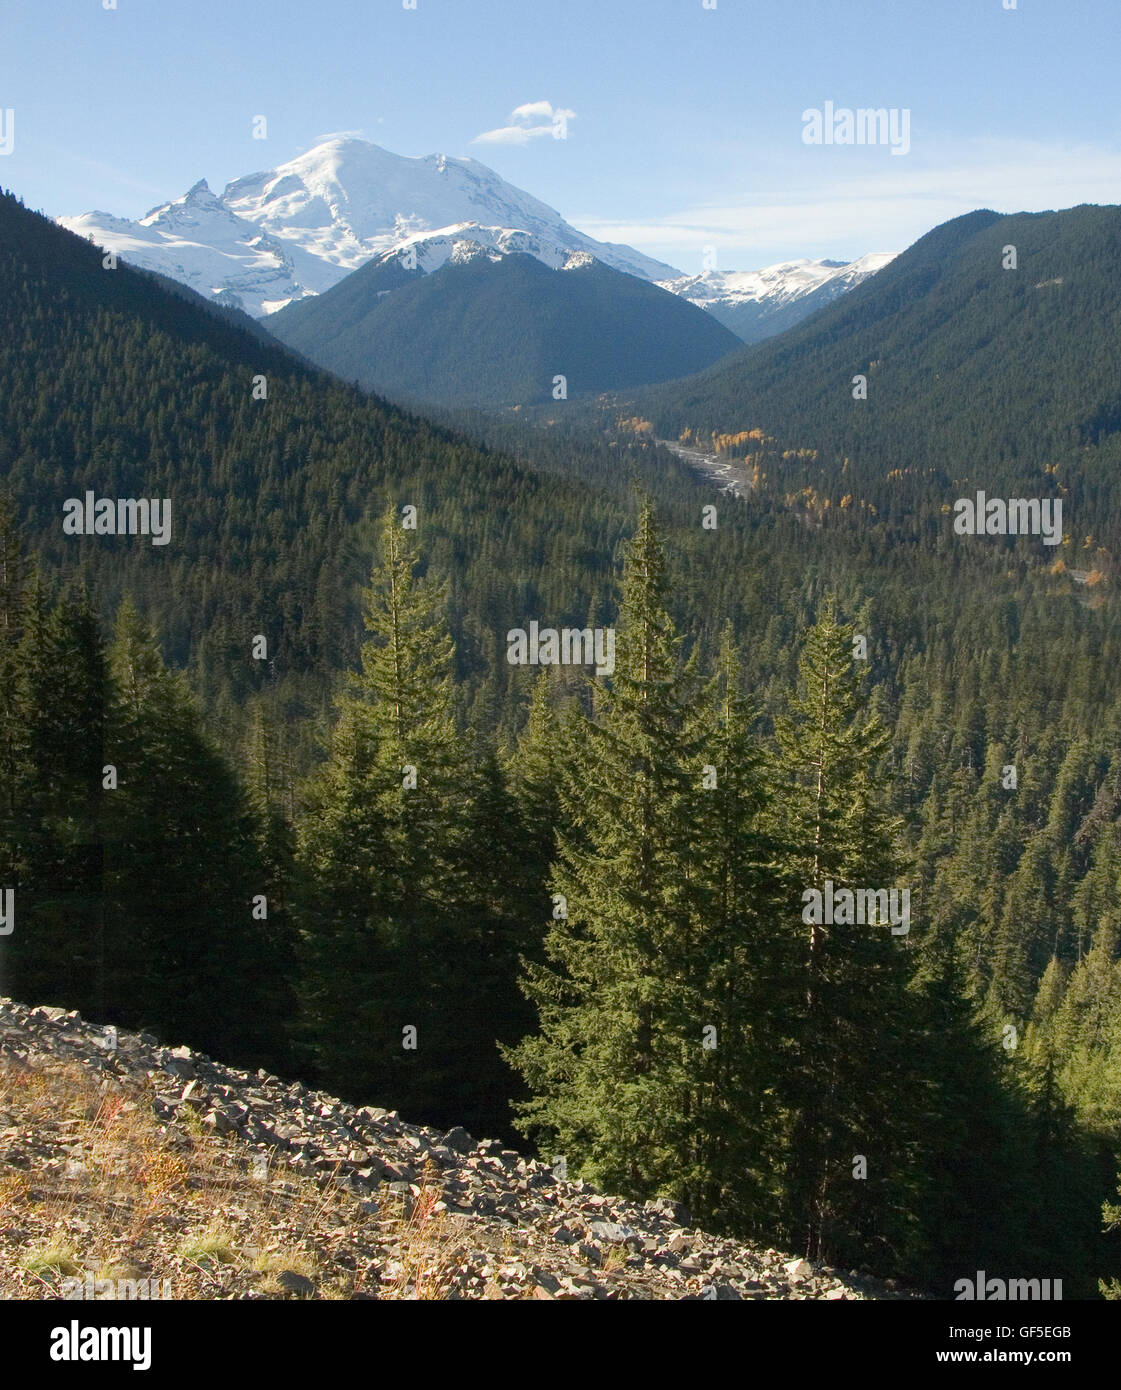 A roadside view of majestic Mount Rainier, as viewed from Washington's Scenic 410, in Mount Rainer National Park. Stock Photo